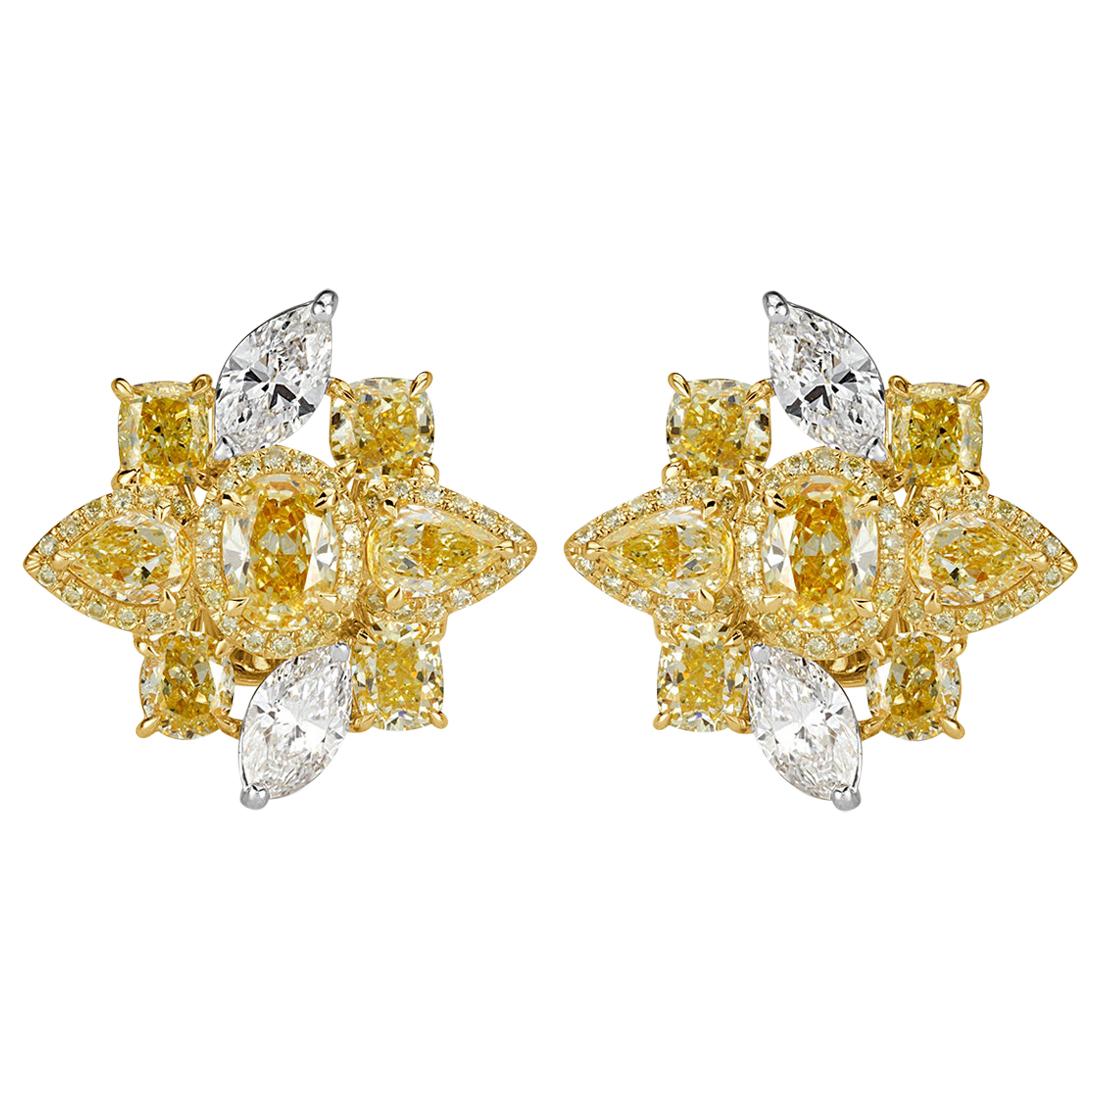 Mark Broumand 5.42 Carat Fancy Yellow and White Diamond Cluster Earrings For Sale